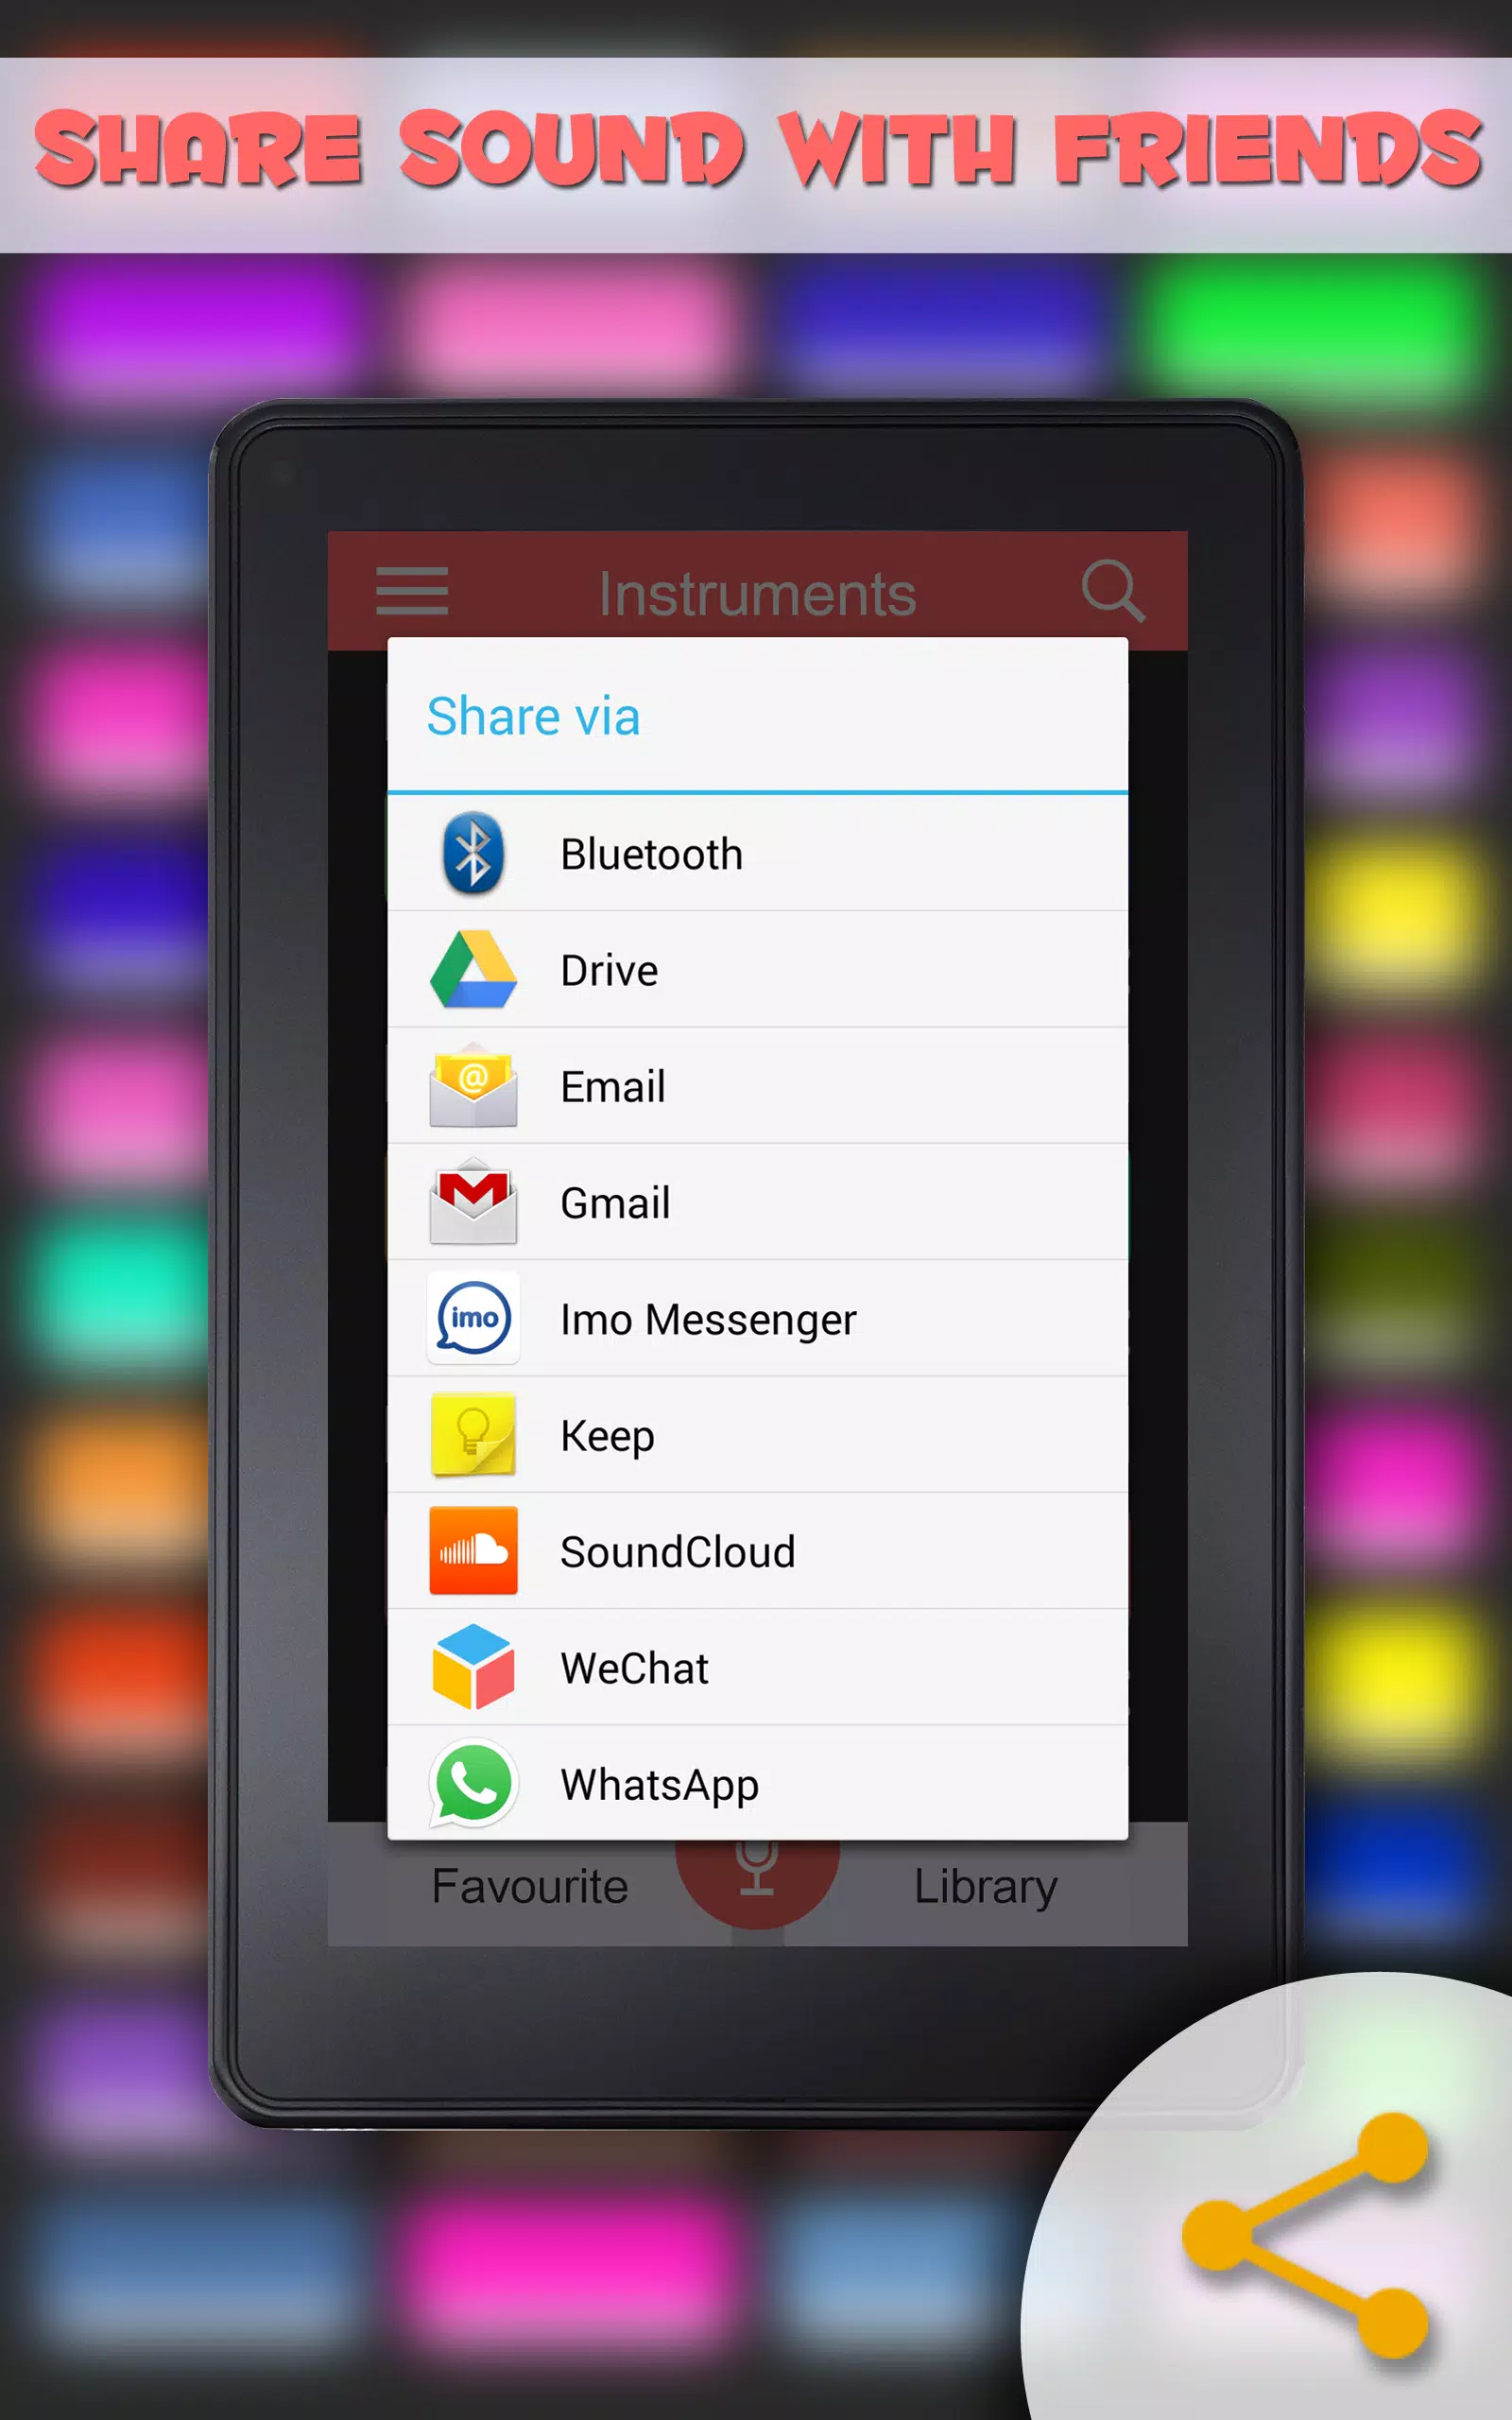 Instant Buttons APK Download for Android Free